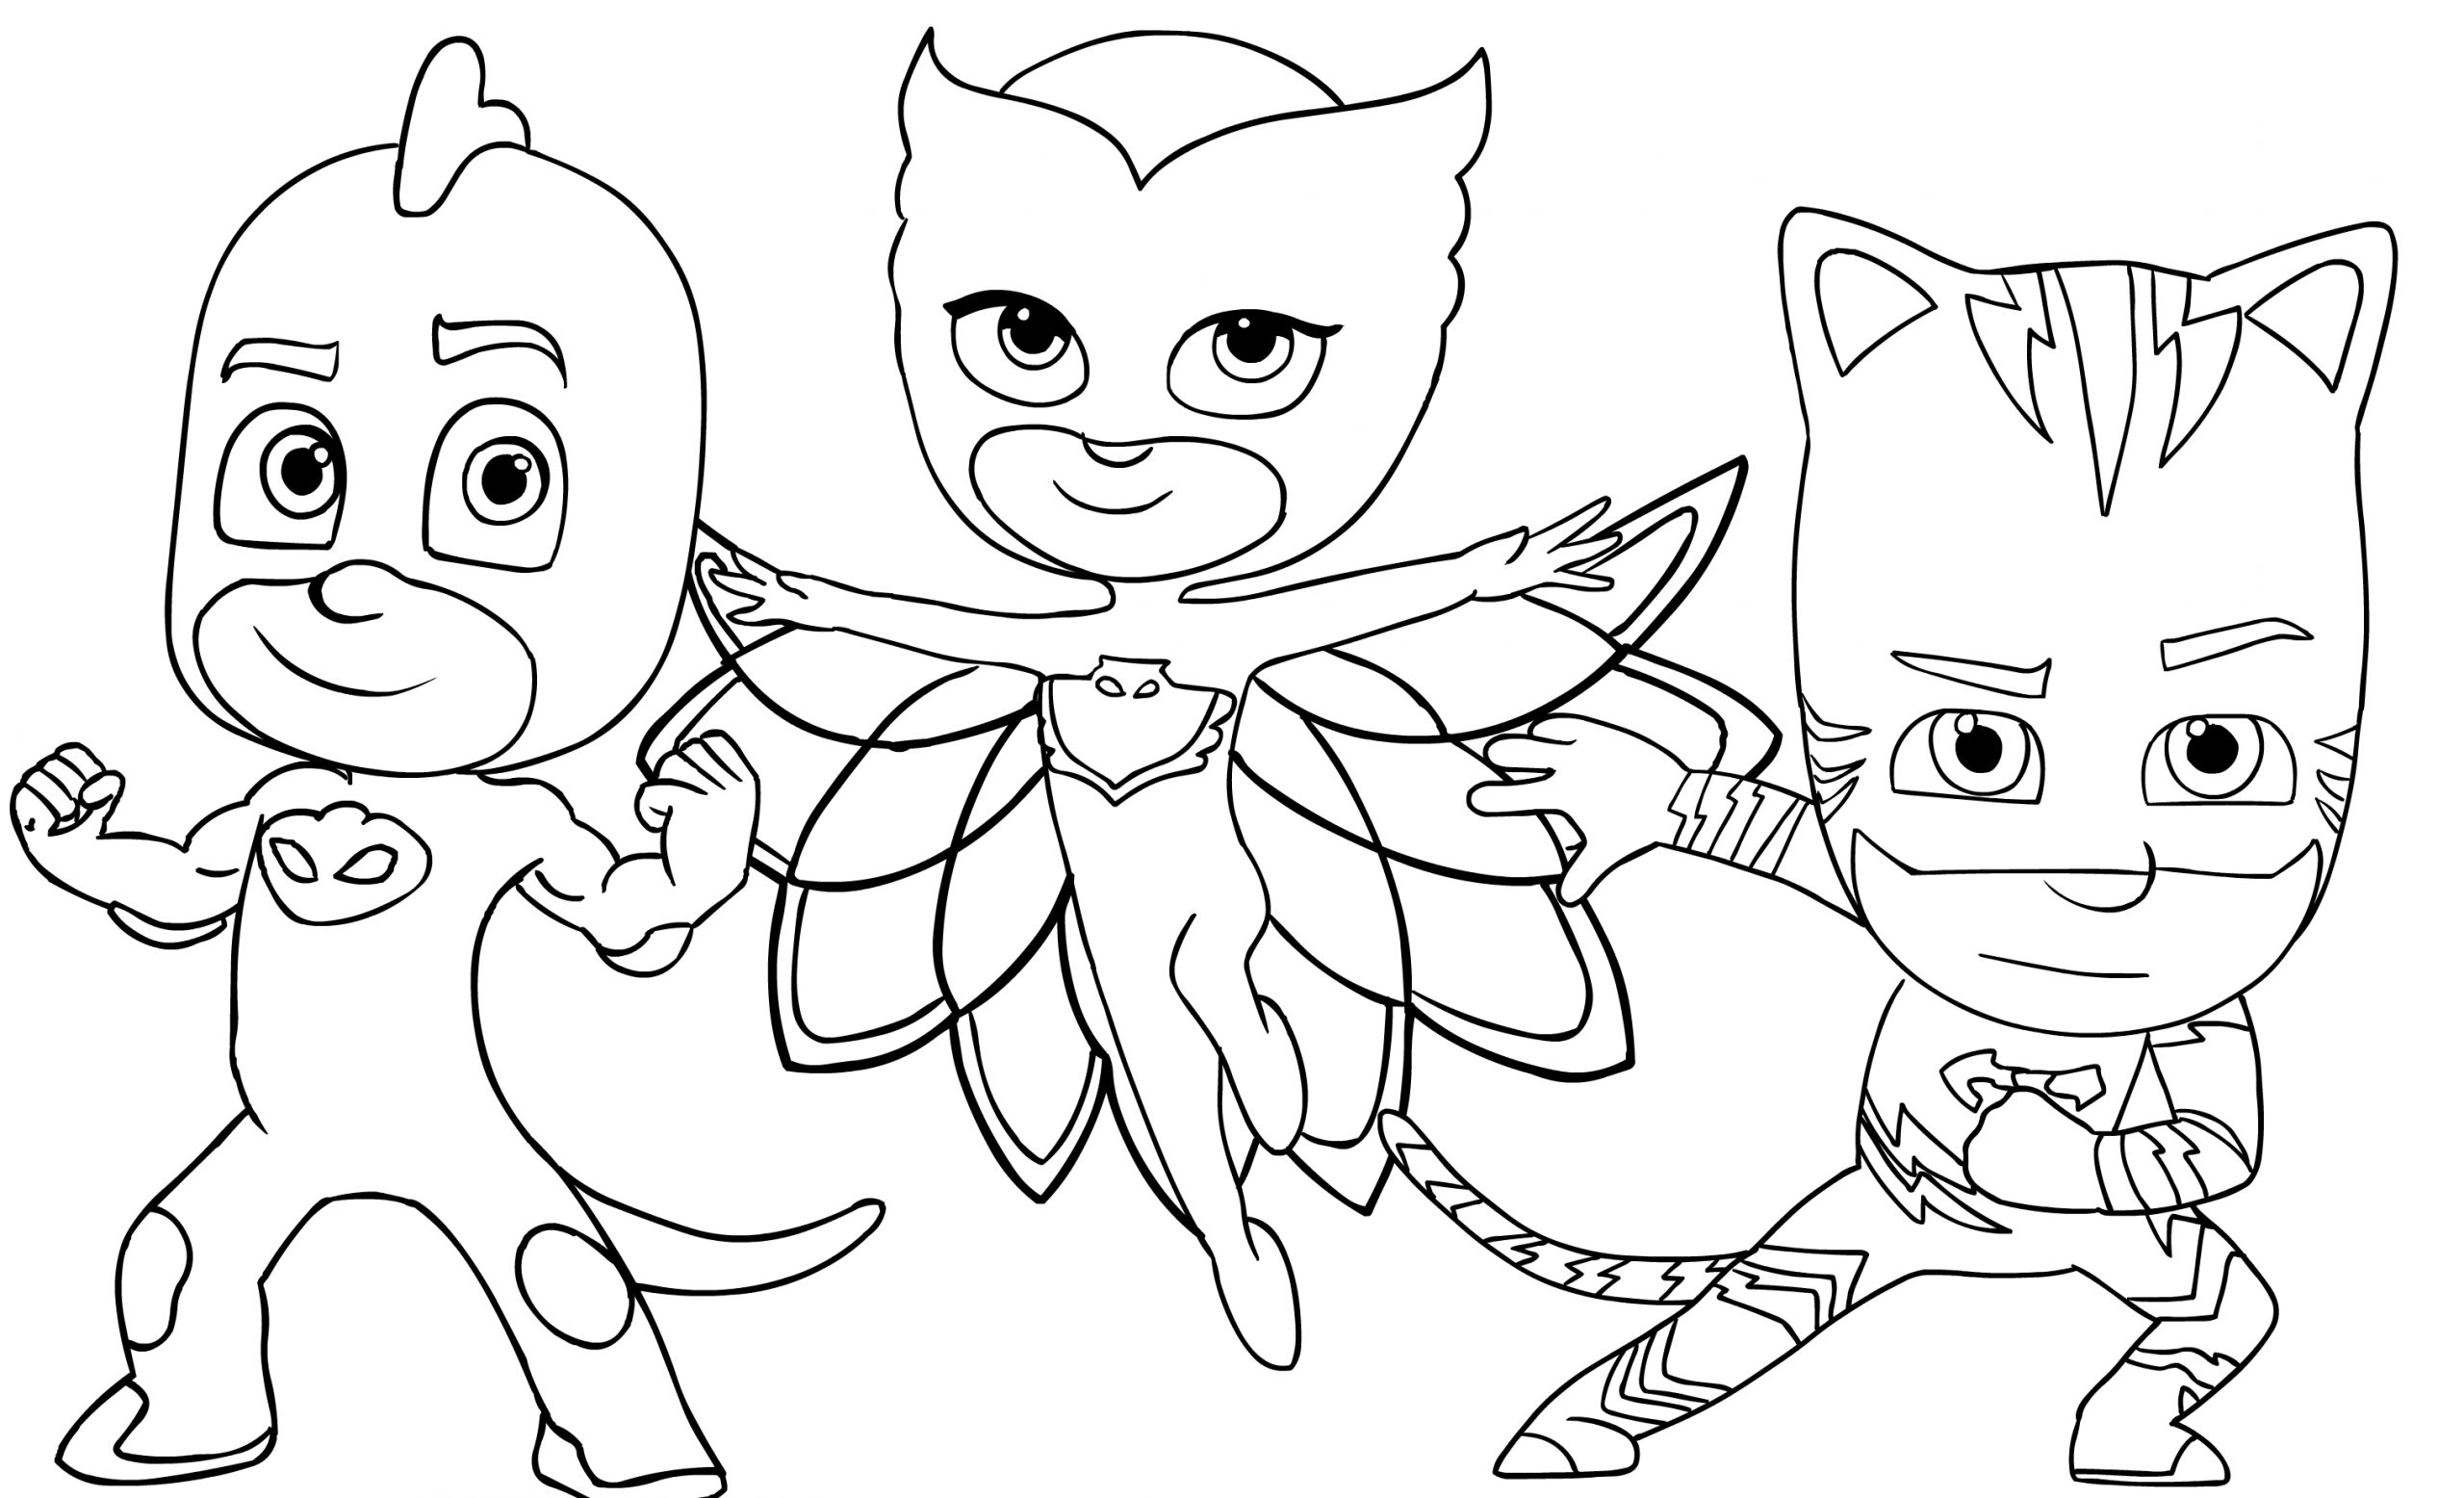 Pj Masks Coloring Pages Coloring Pages For Kids And - vrogue.co